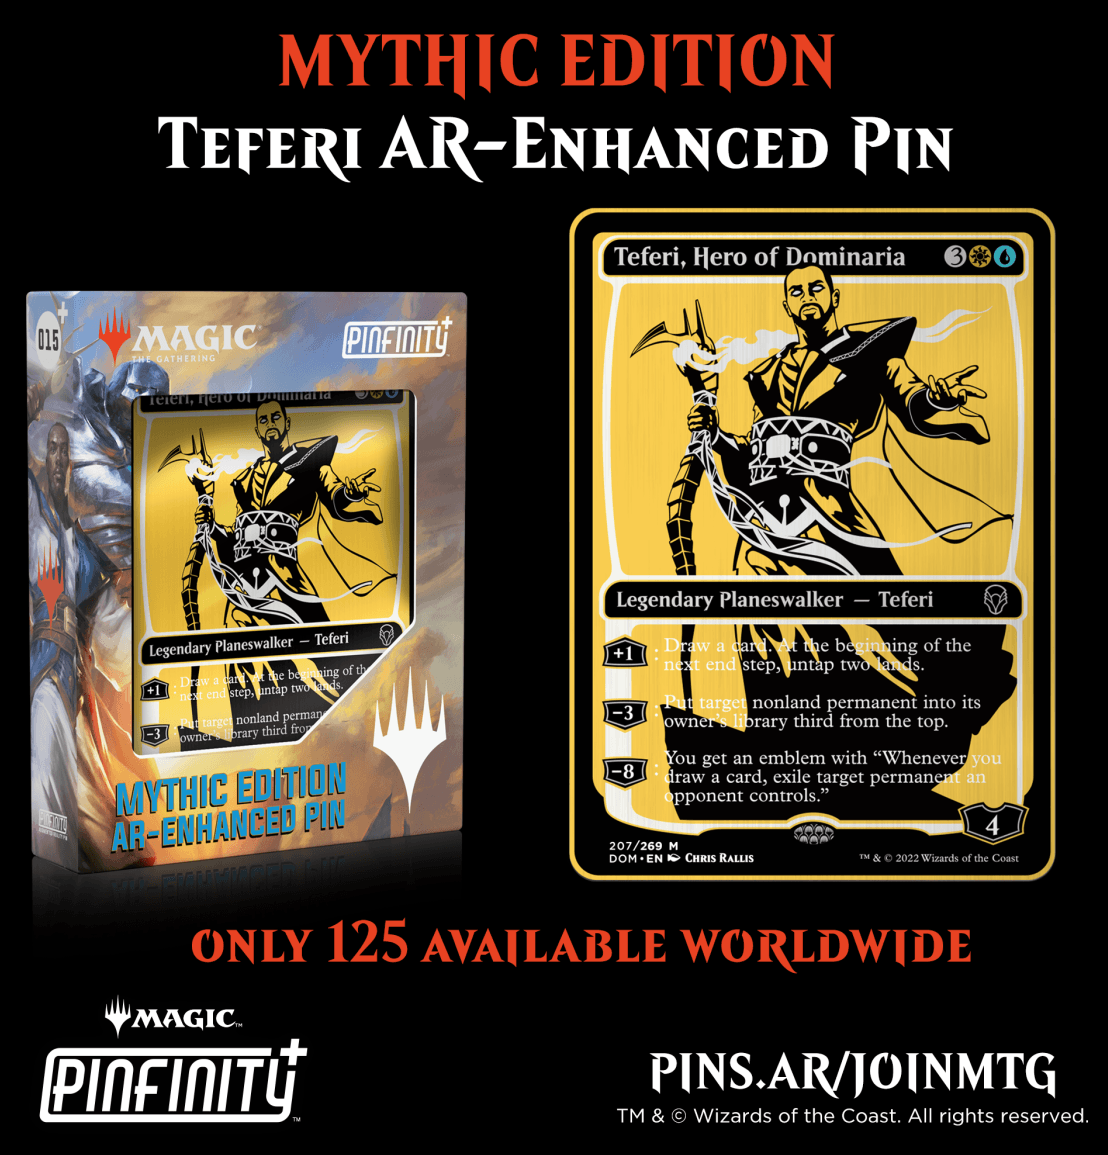 Exclusive Mythic Edition Teferi Pin Launch! - Pinfinity - Augmented Reality Collectible Pins